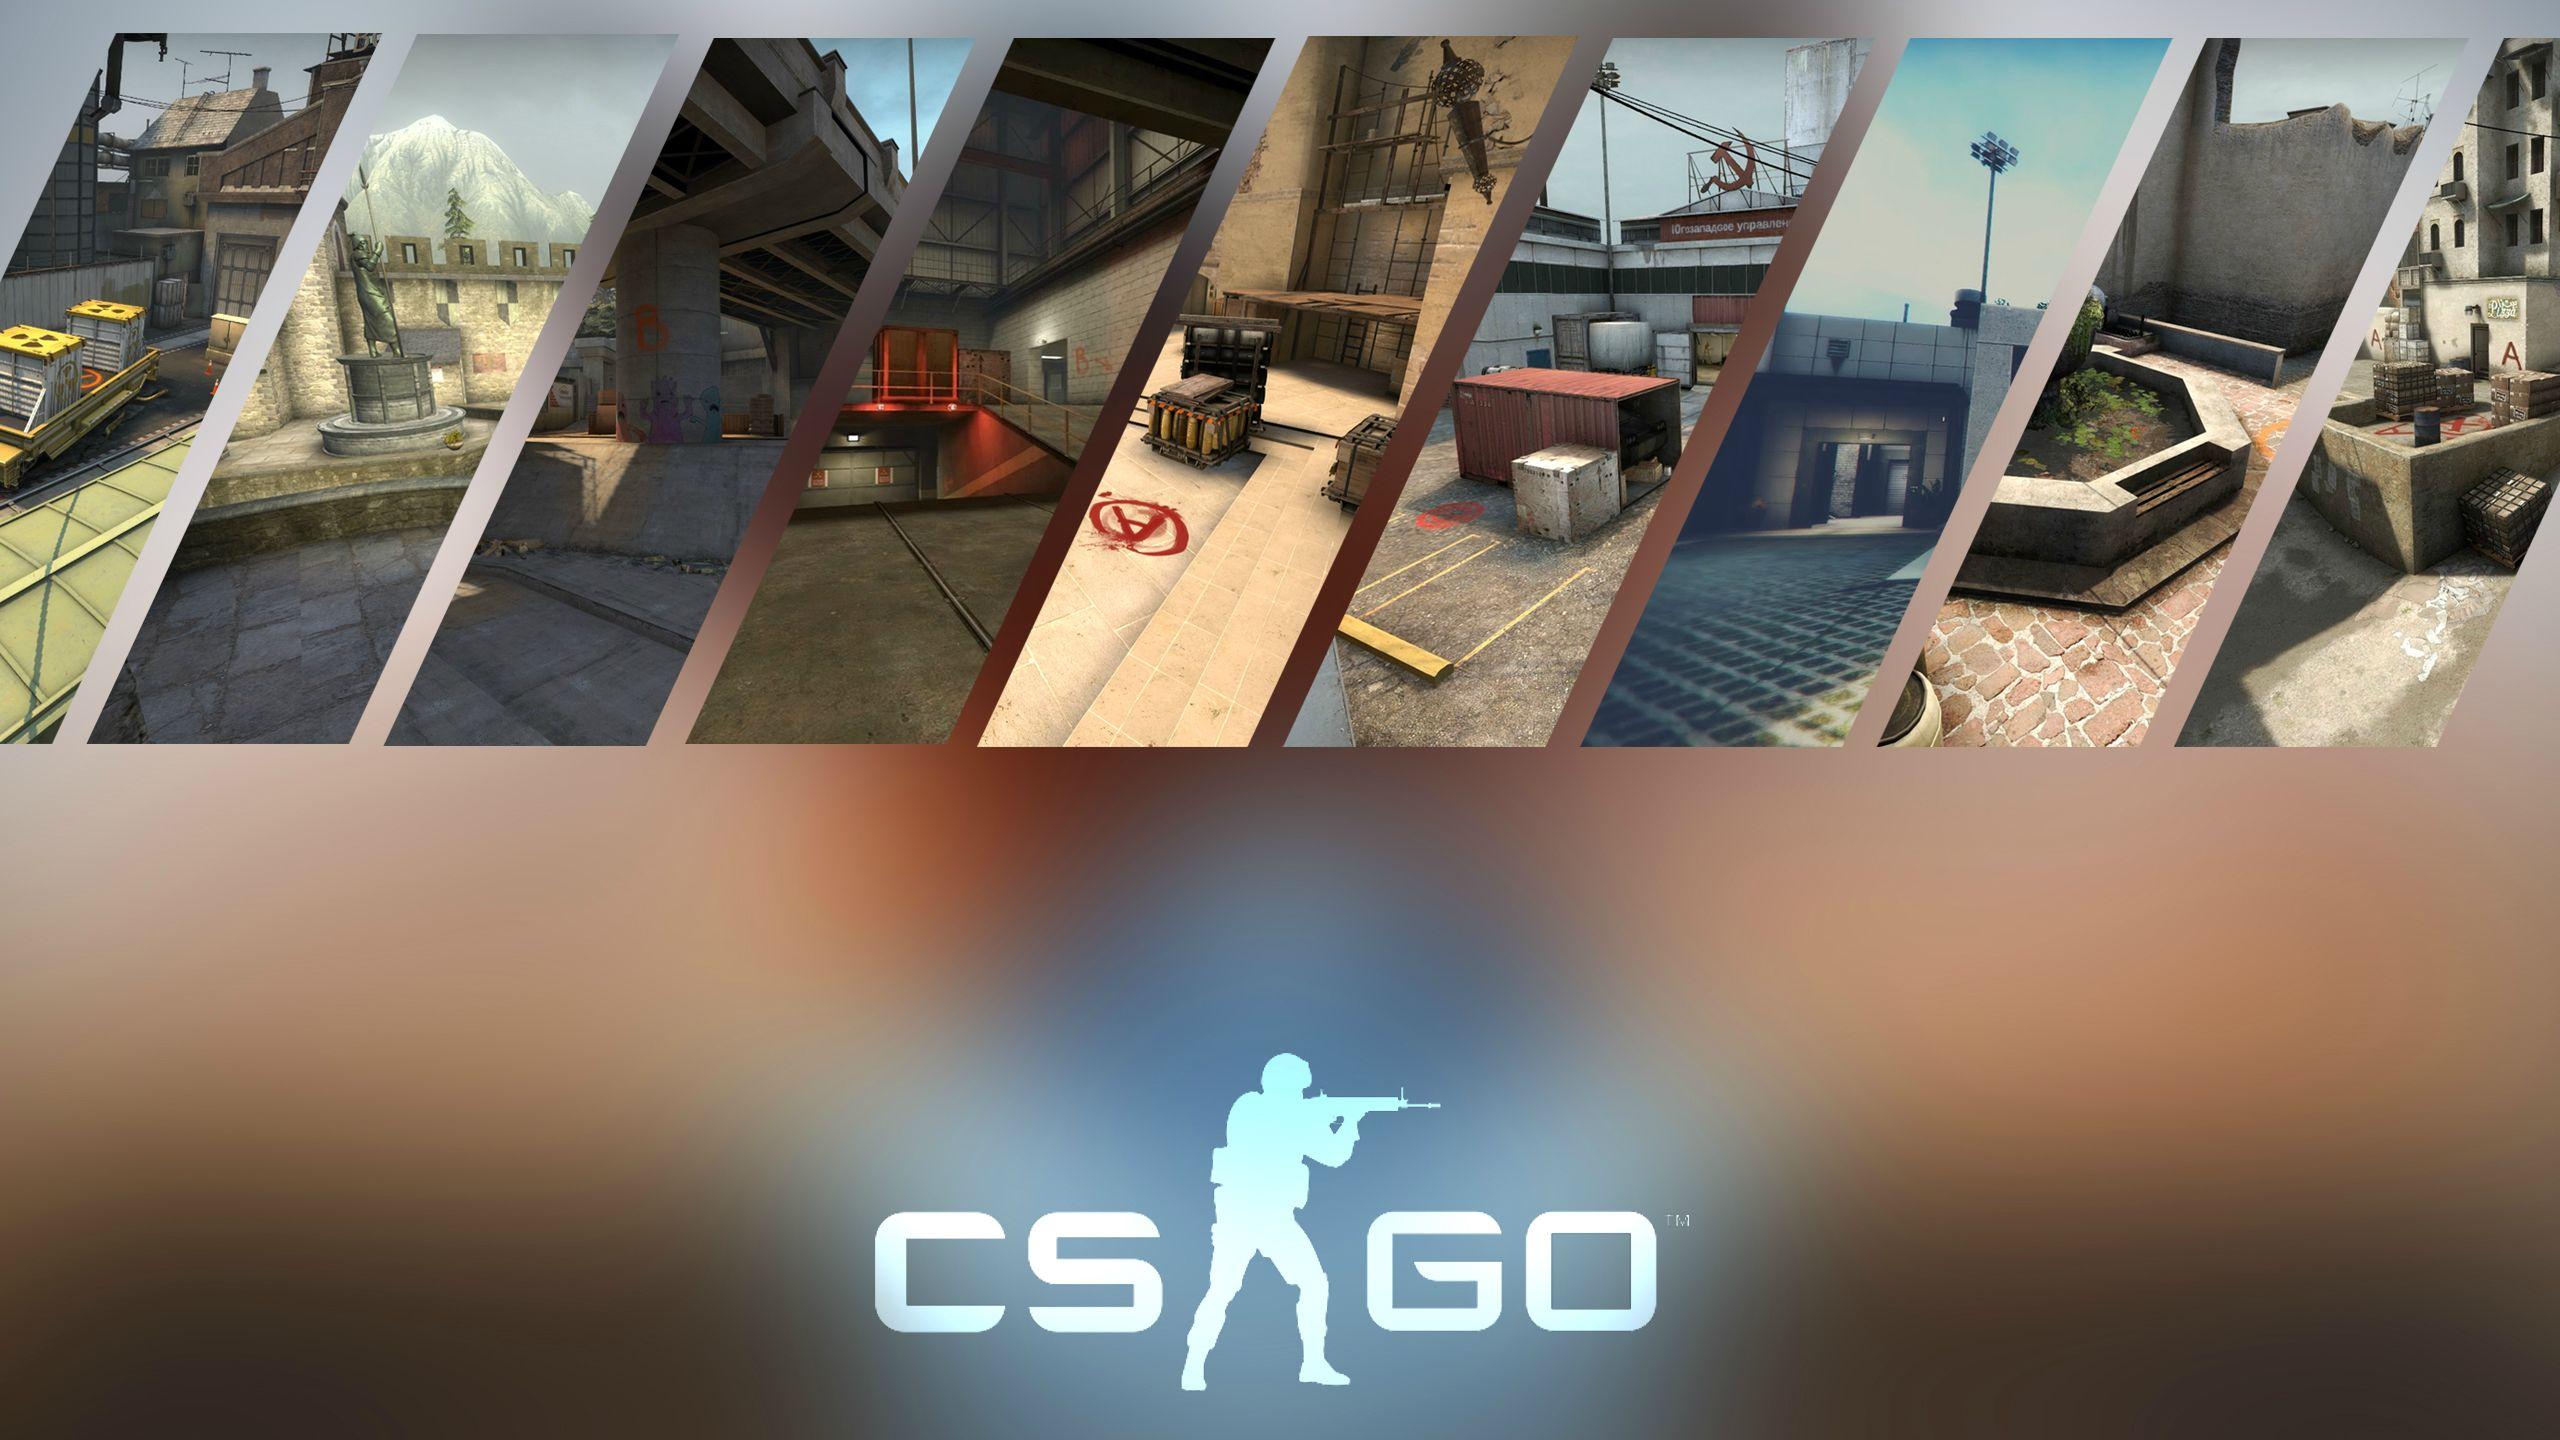 Remember that wallpaper with the 5 main CS:GO maps? Well I updated